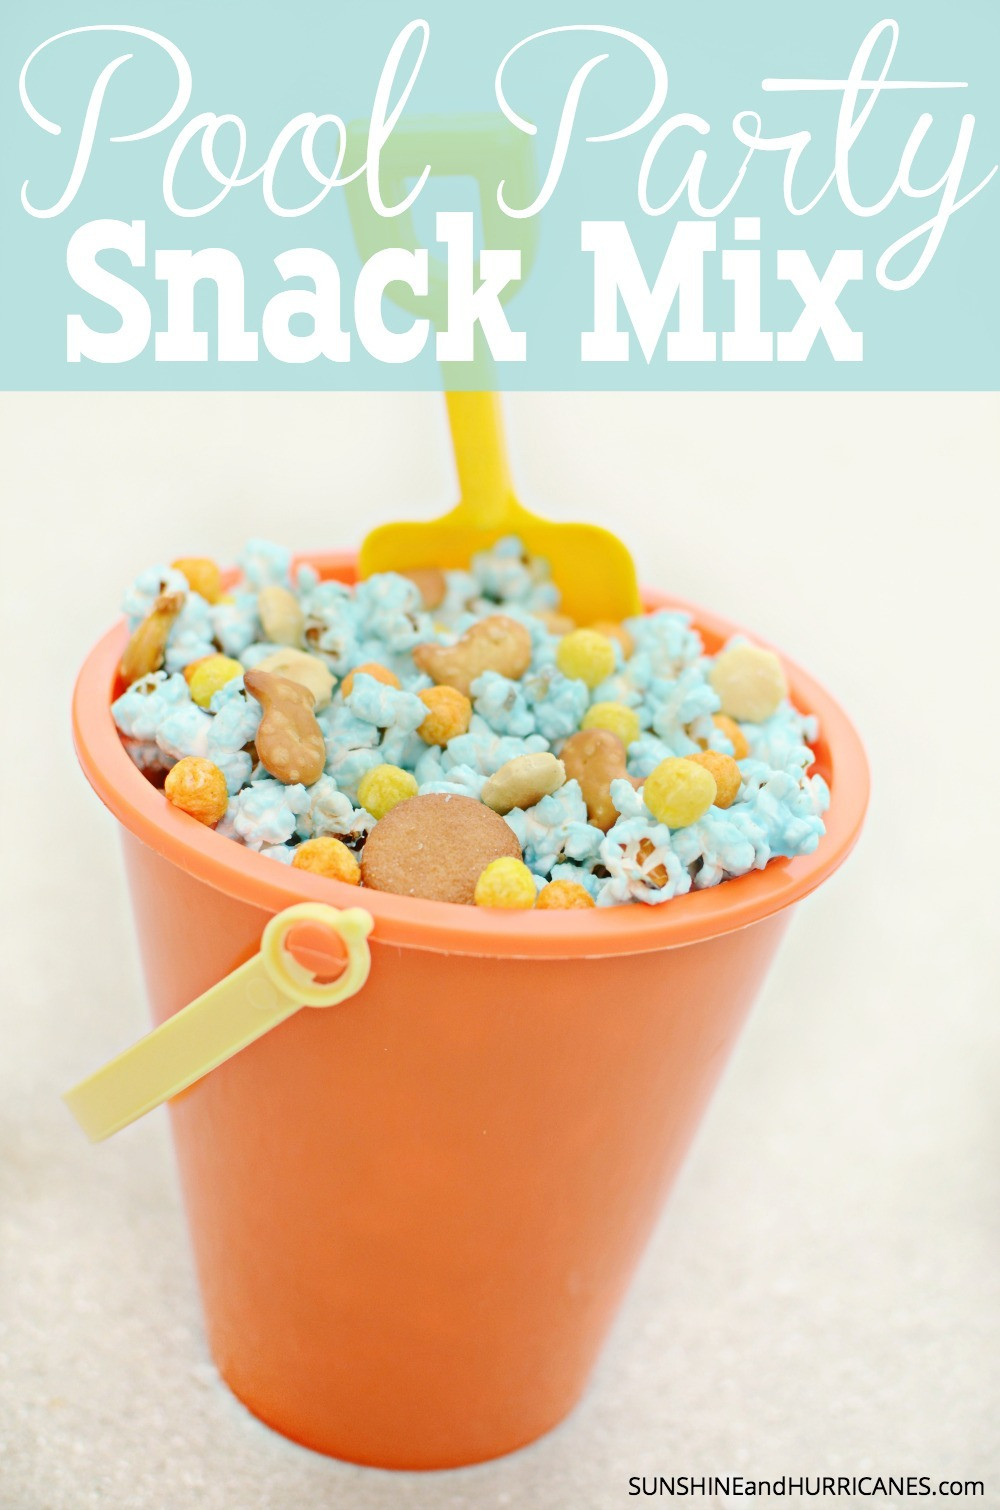 Pool Party Snack Ideas
 Pool Party Snack Mix